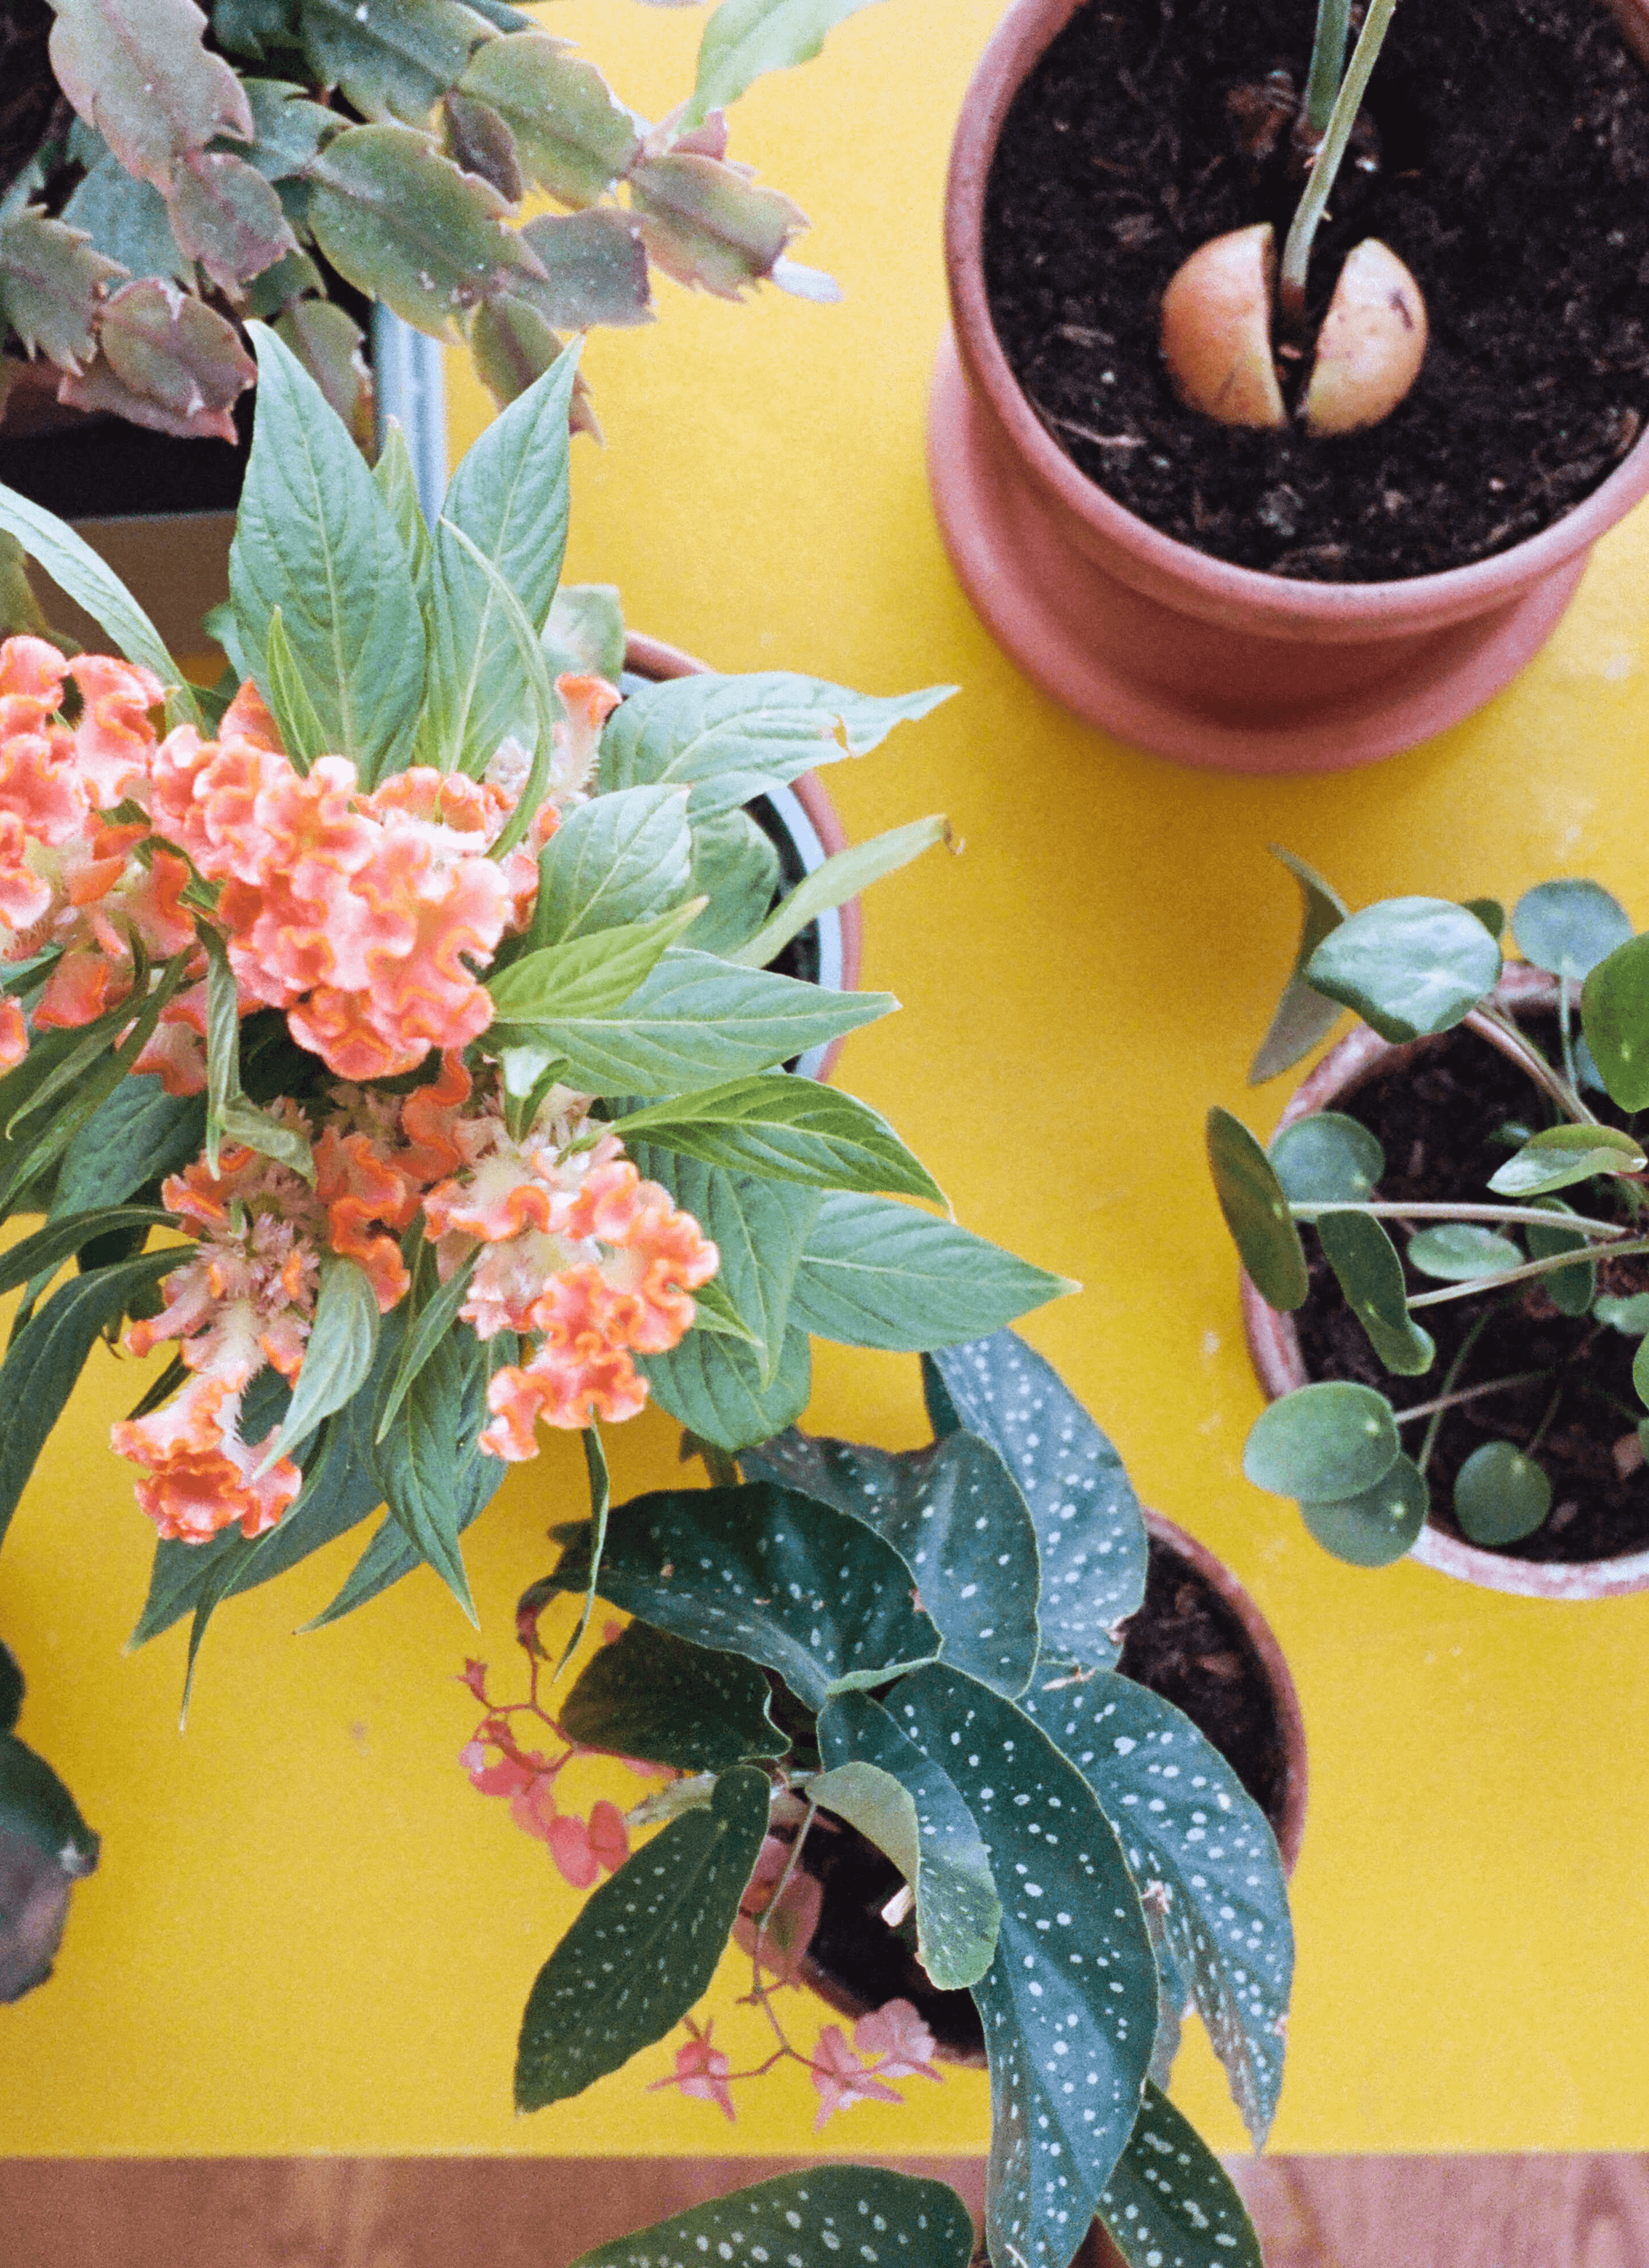 A pot of Impatiens balsamina, Angel wing begonia, Chinese money plant, Schlumbergera truncata (cactus) and an avocado-like plant on a yellow table.